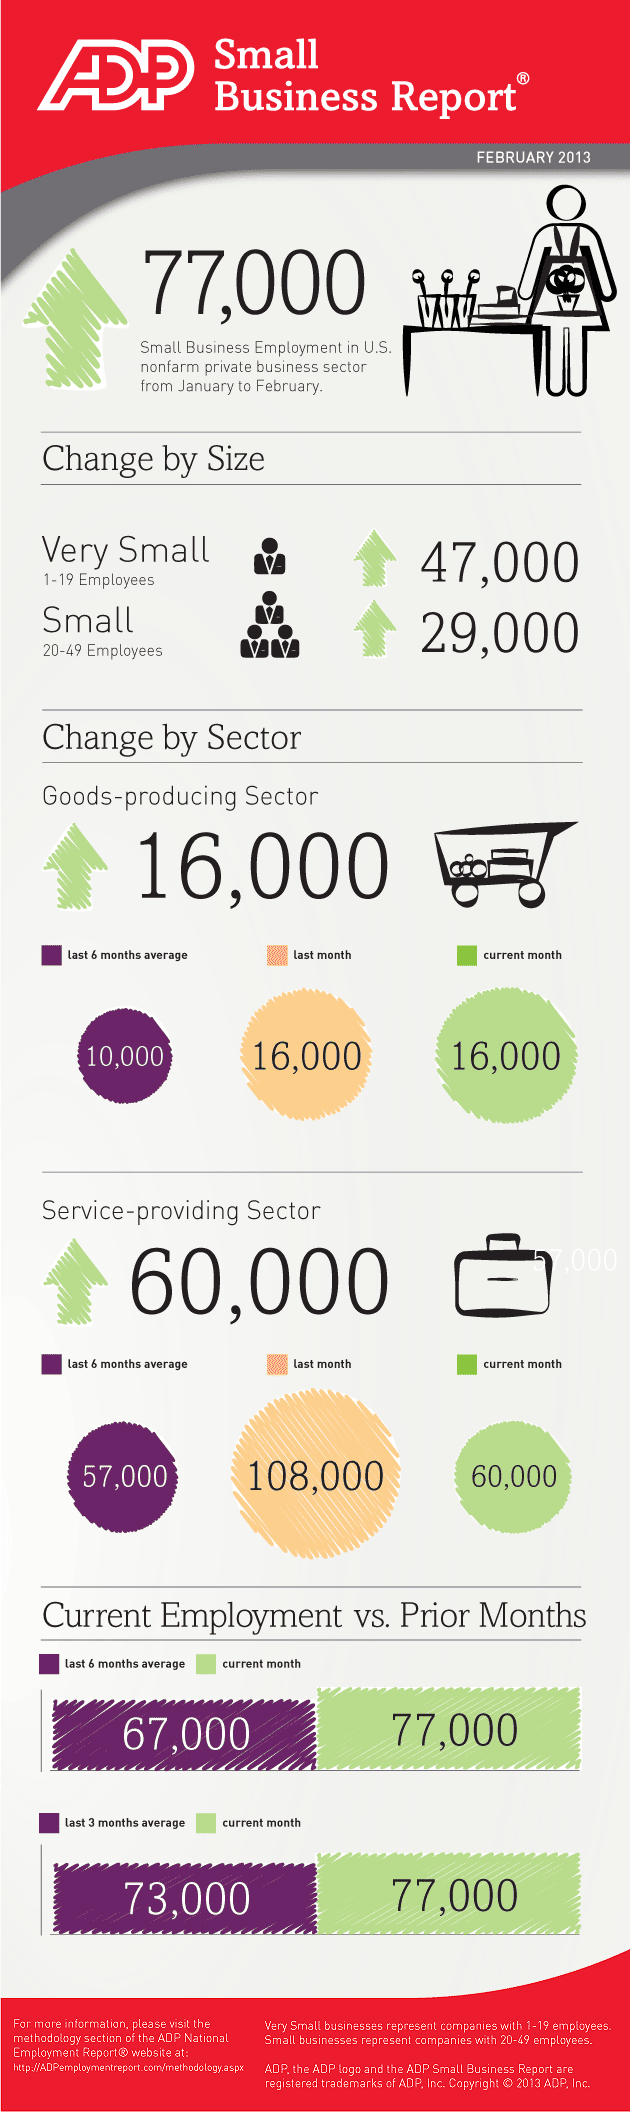 Small Businesses Created 77,000 Jobs in February, According to National Employment Report Infographic